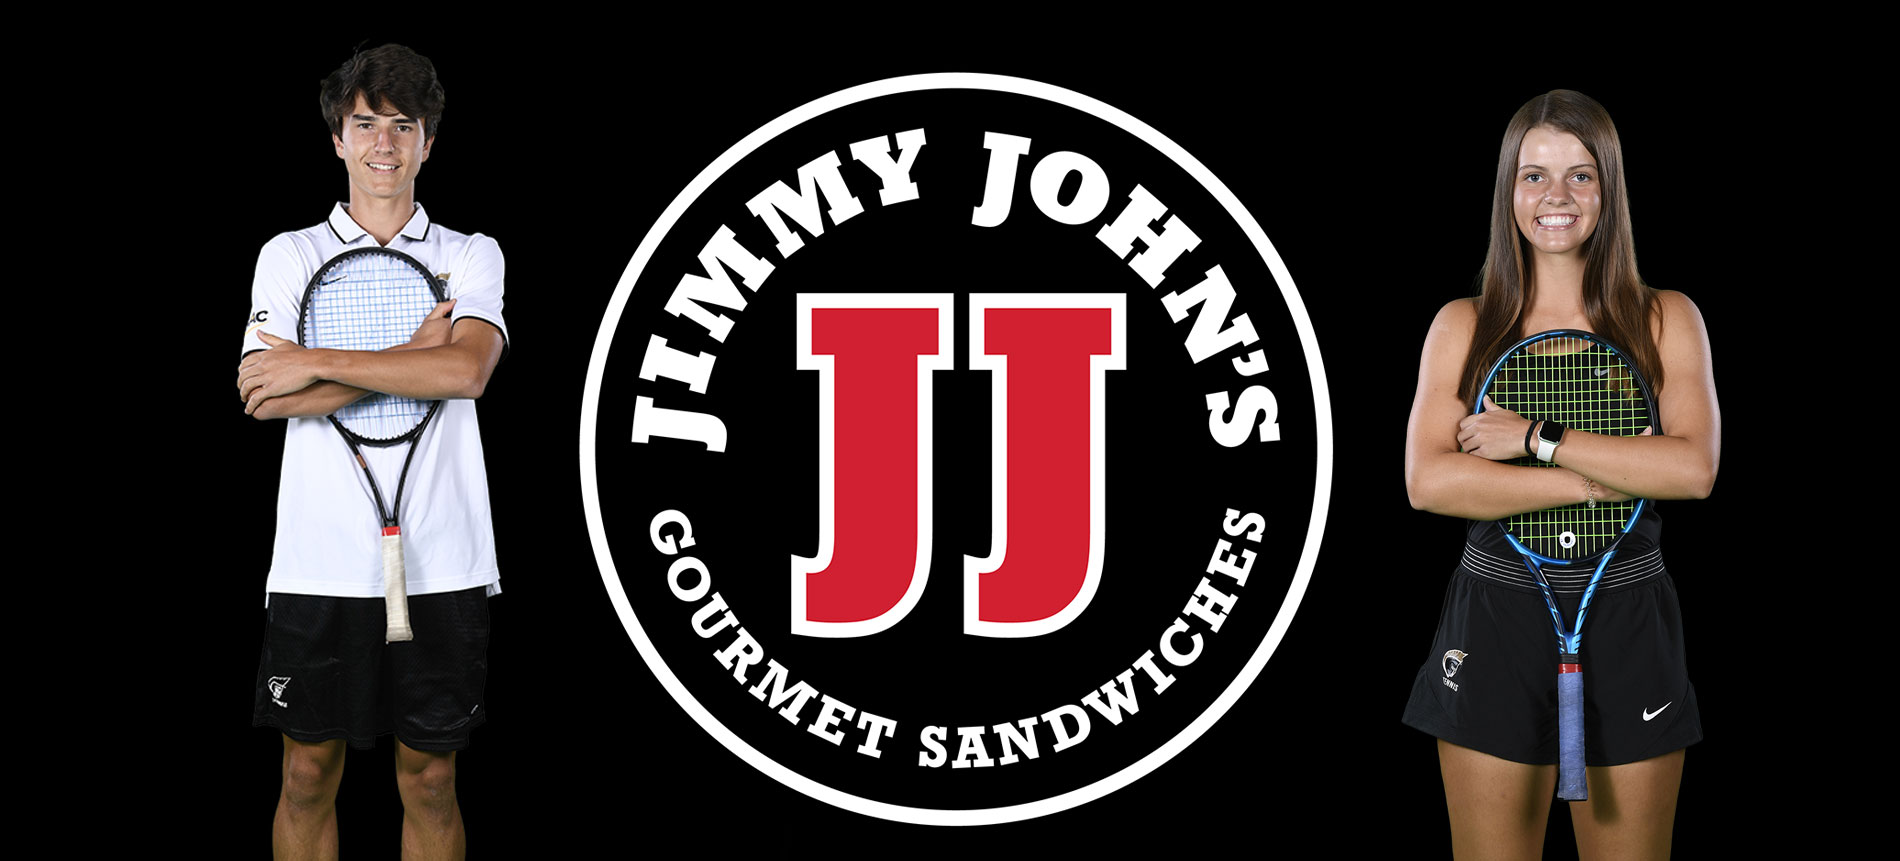 Sengariz and Robeson Earn Jimmy John's Athlete of the Week Honors